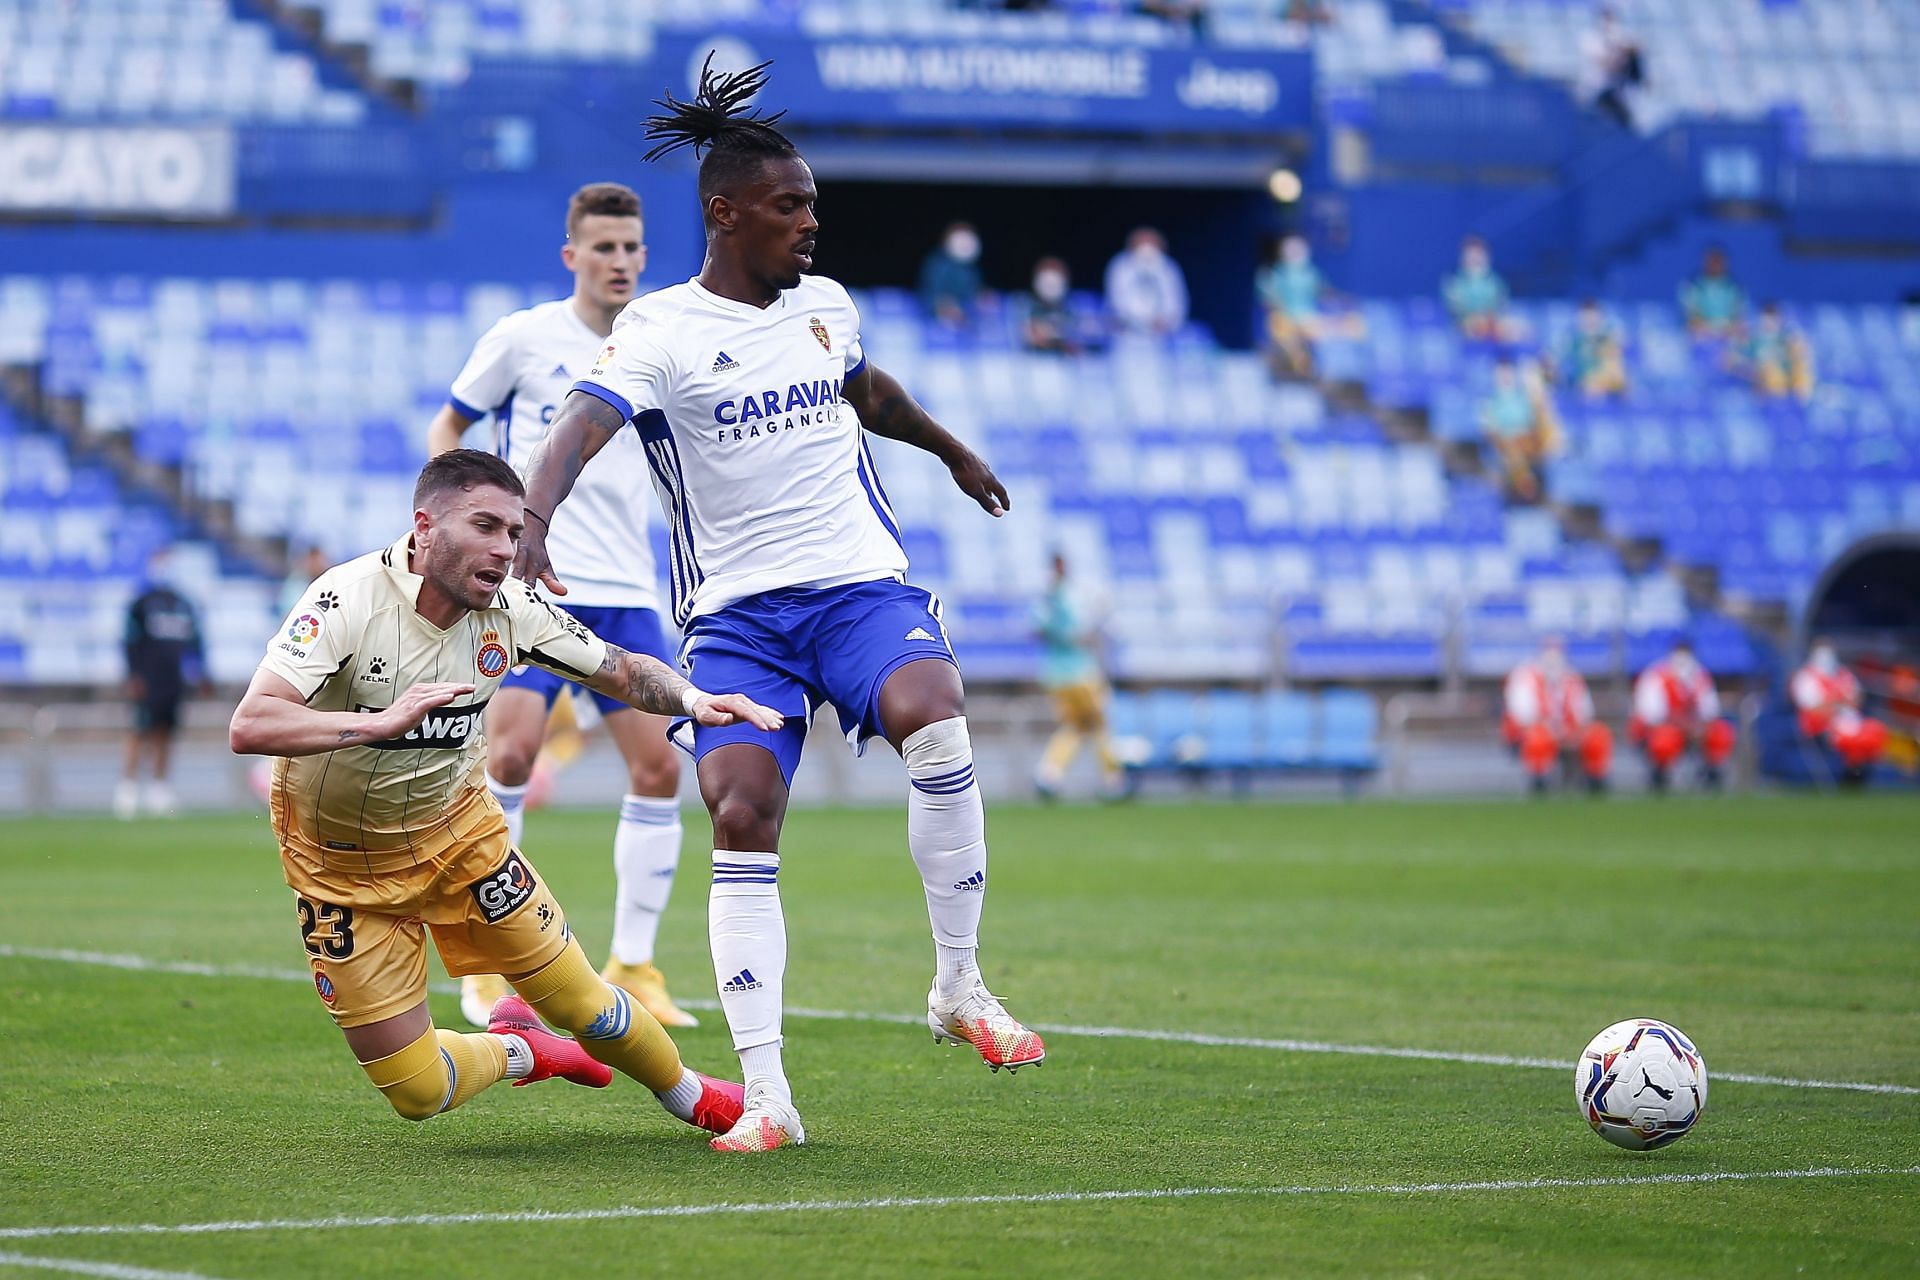 Real Zaragoza are looking to get back to winning ways